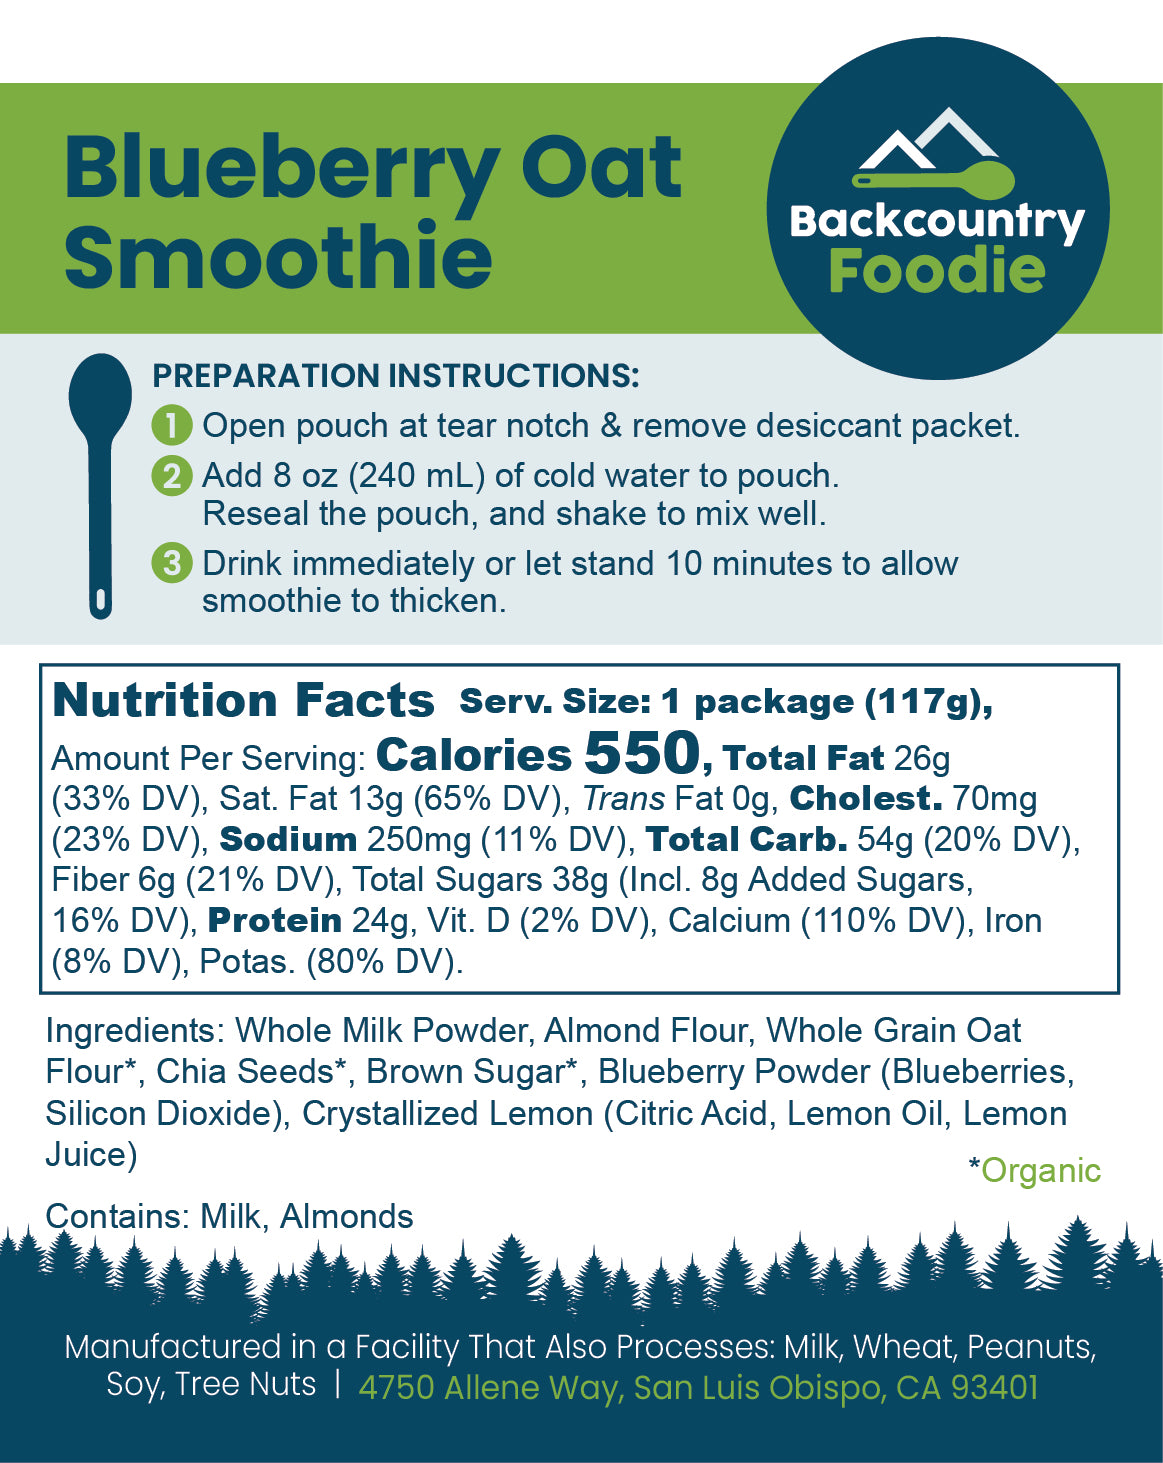 Backcountry Foodie - Blueberry Oat Smoothie